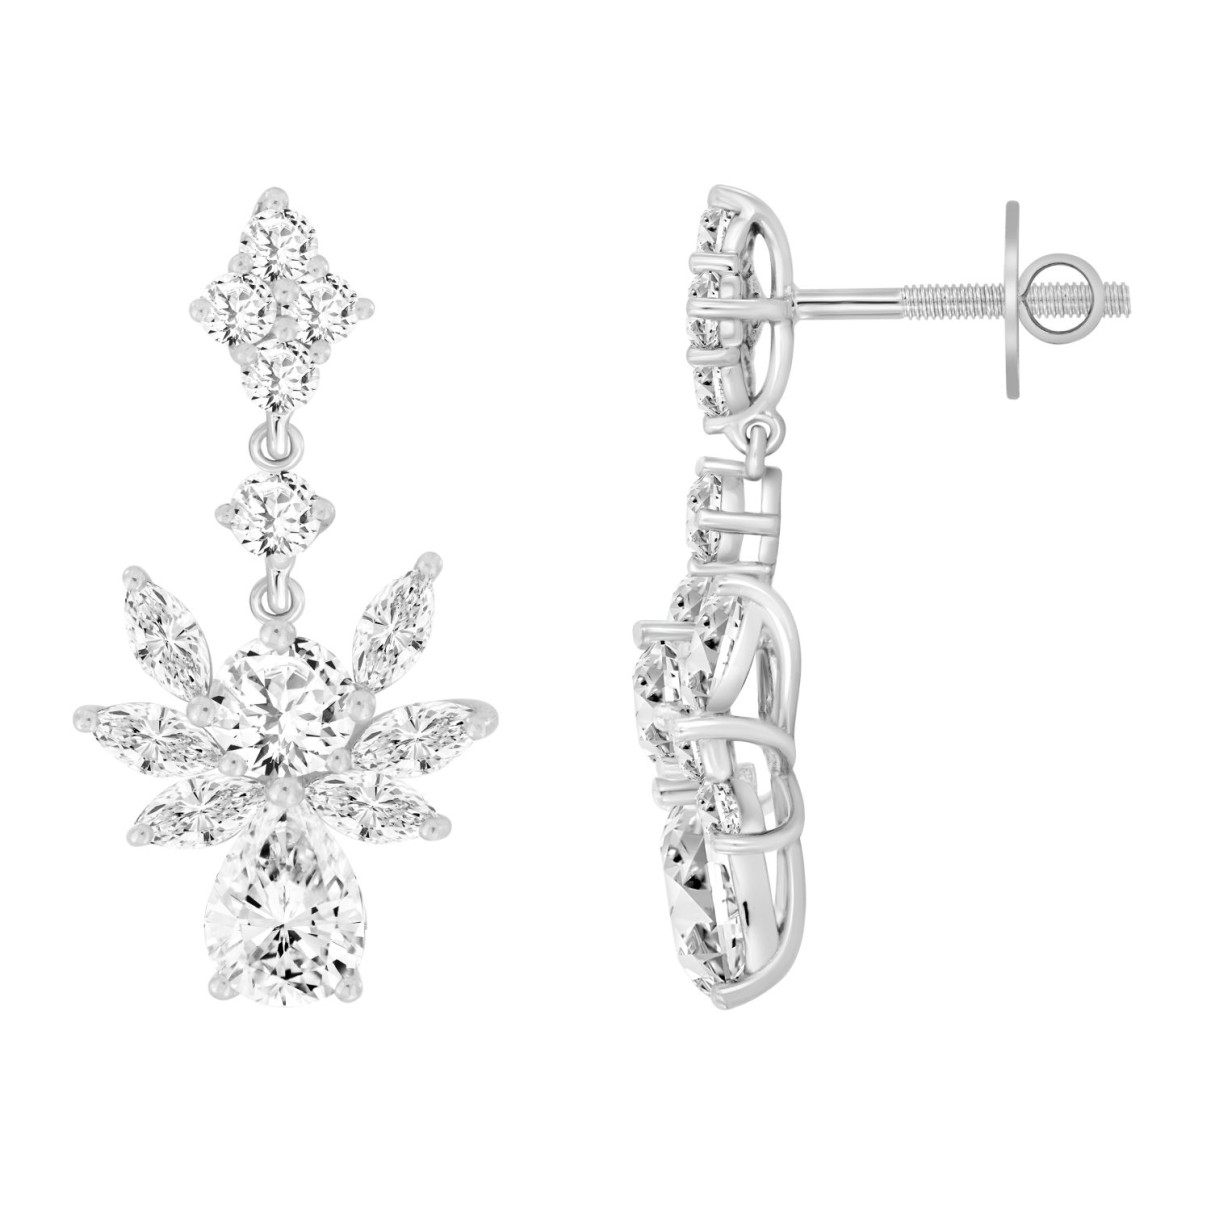 LADIES EARRINGS 7CT ROUND/MARQUISE/PEAR DIAMOND 14K WHITE GOLD